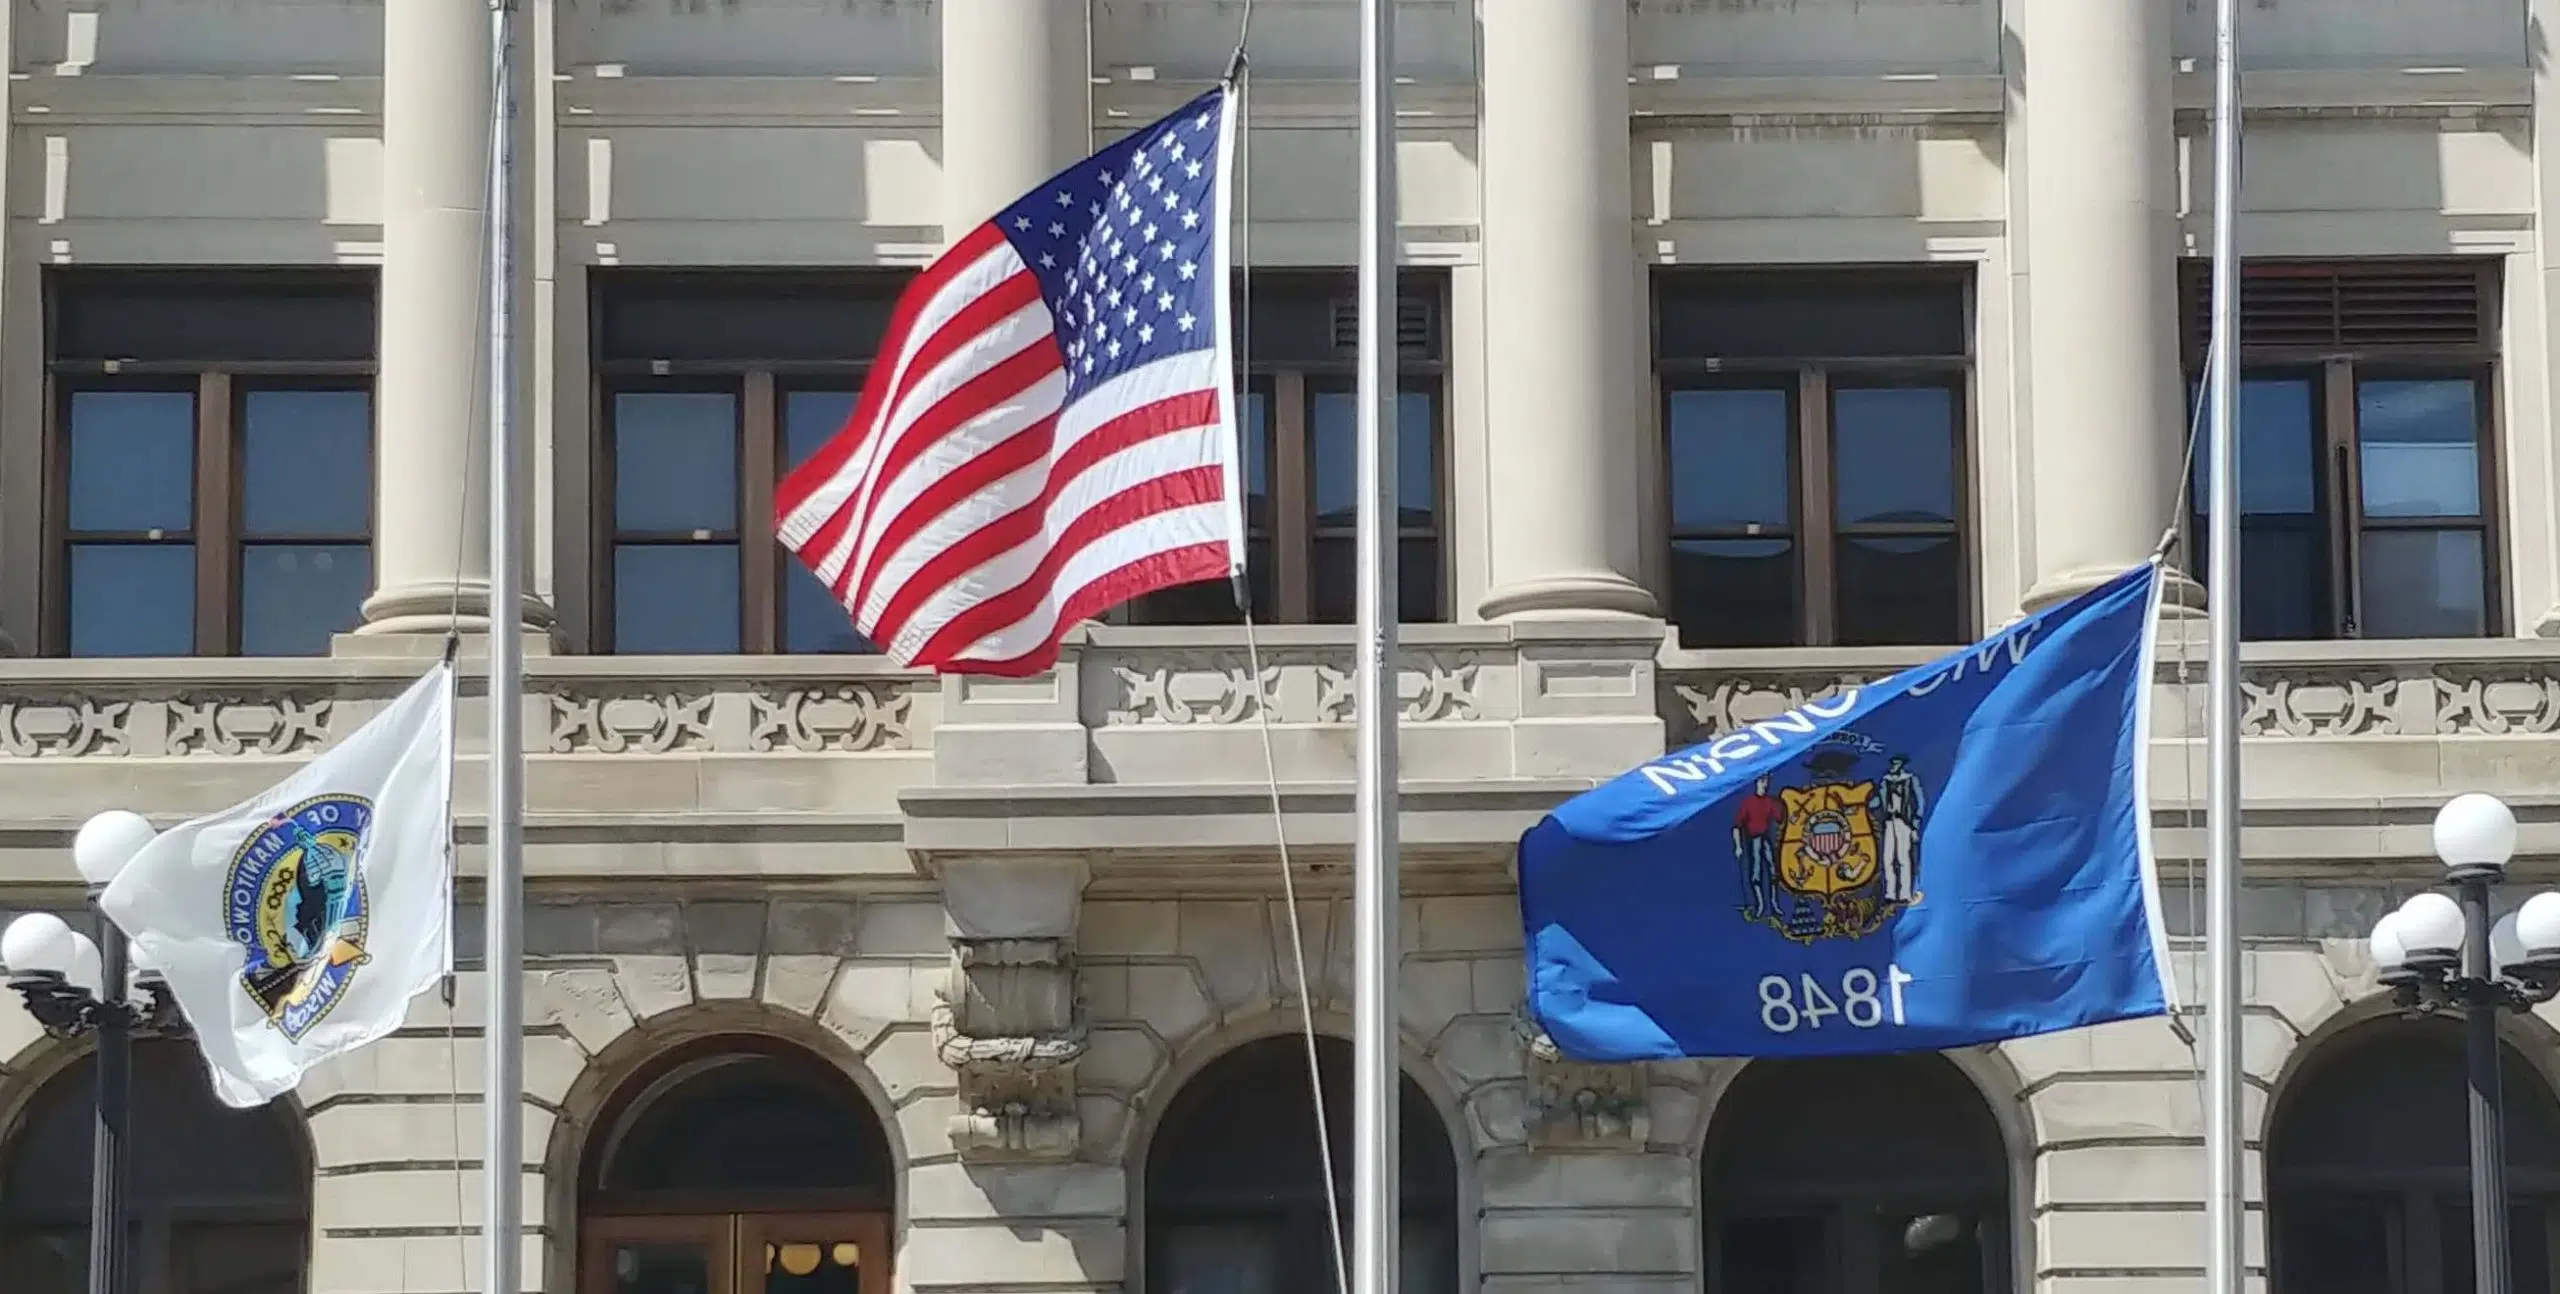 Governor Walker Orders Flags to Half-Staff Following Tragedy in Santa Fe, Texas